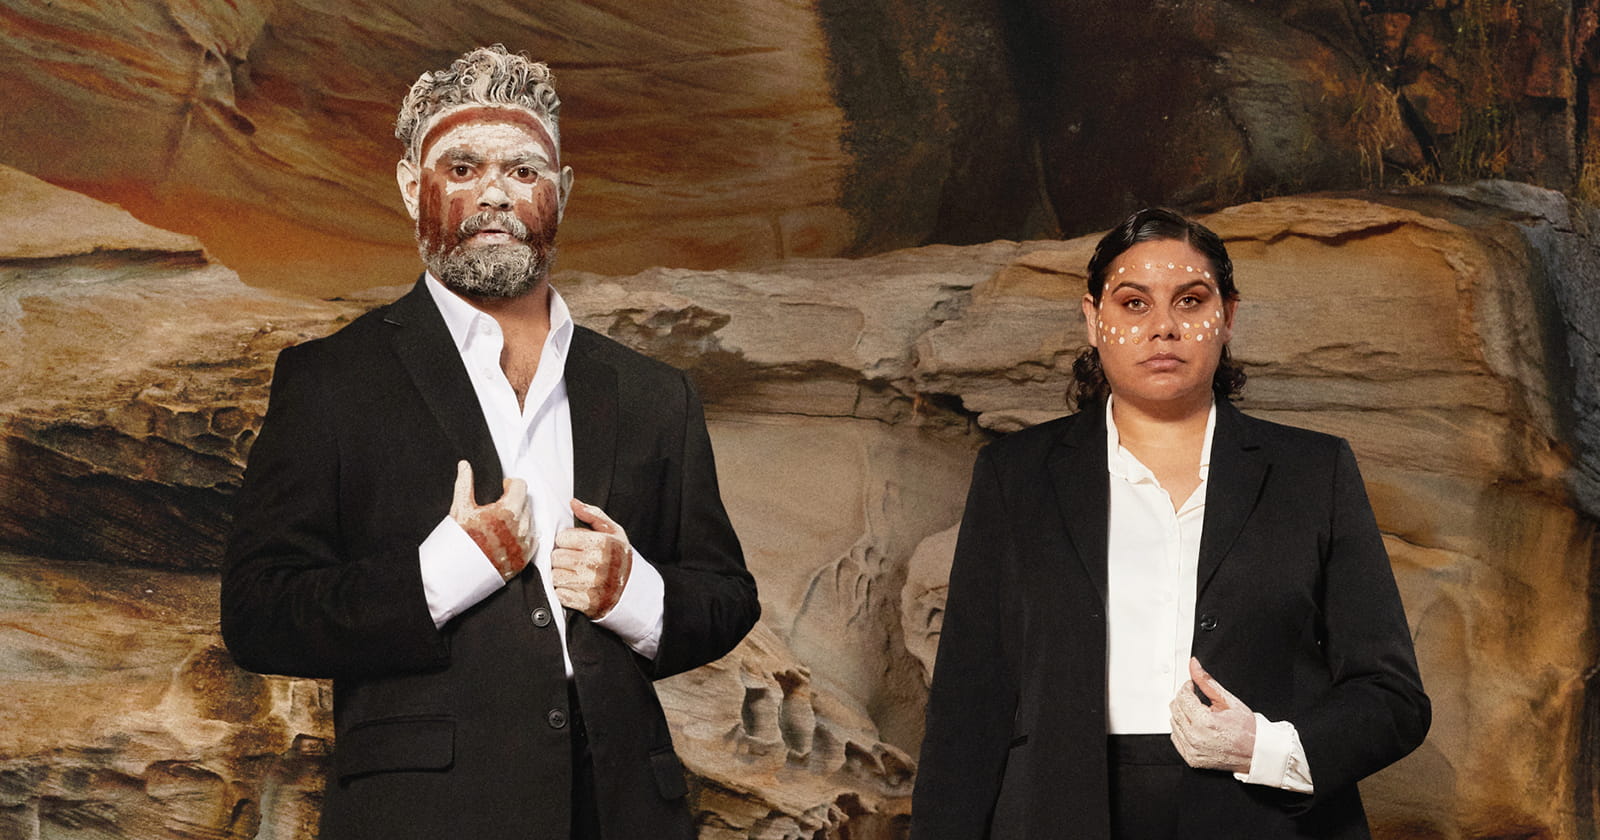  Riverside Theatres presents THE VISITORS, a Captivating Insight into Australia’s Painful Colonial Past